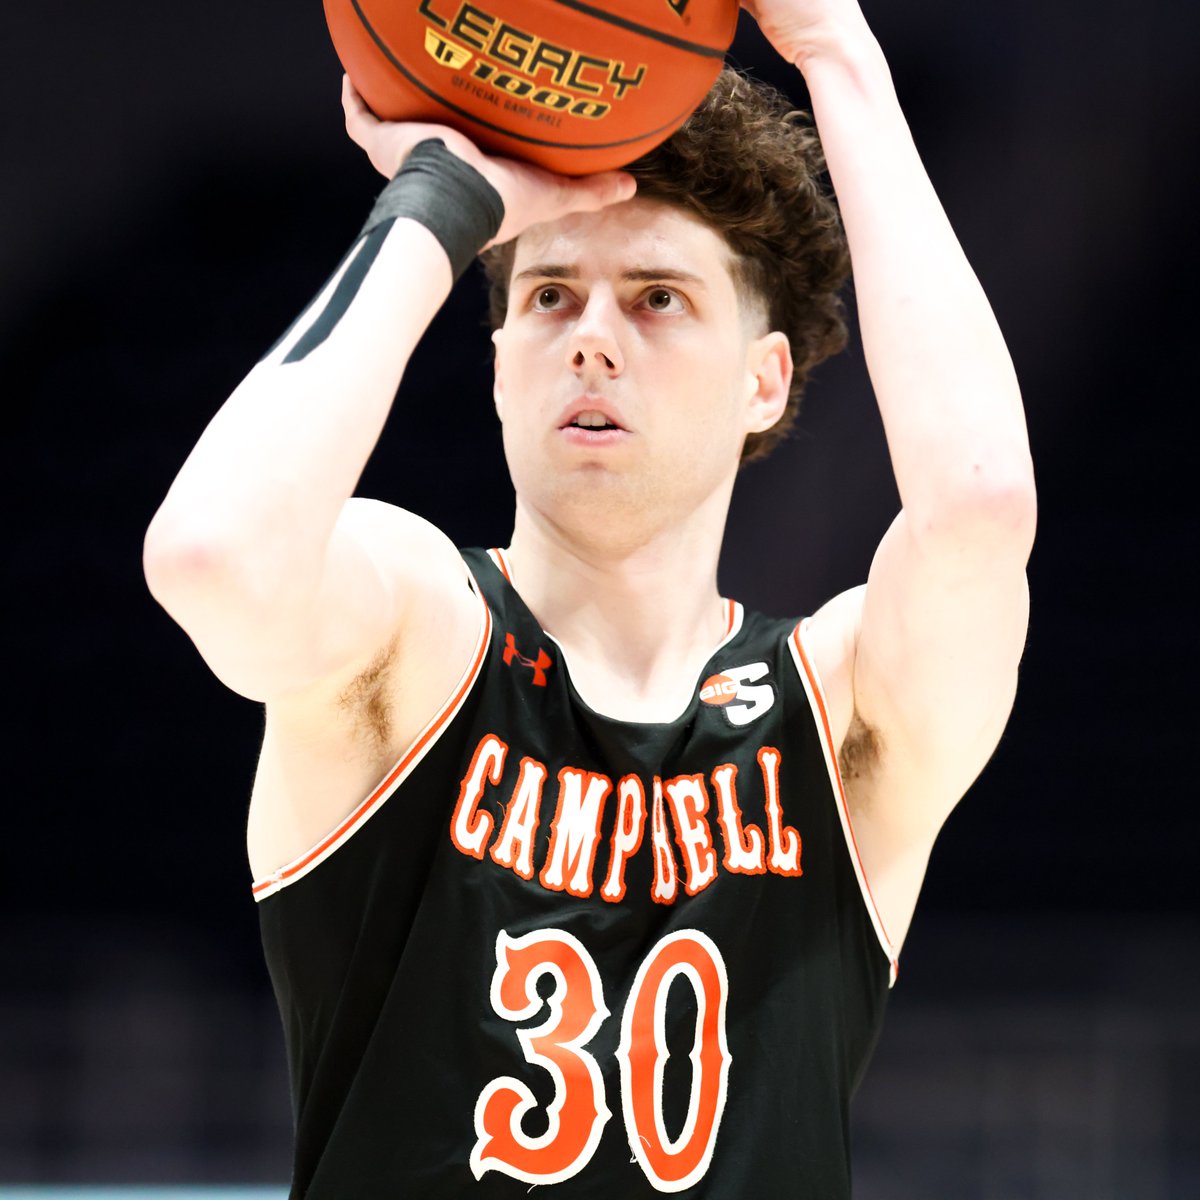 NEWS: Campbell transfer Anthony Dell'Orso, one of the best available wings in the portal, has committed to Arizona, he told ESPN. The 6'6 sophomore Australian averaged 20.2 points, shooting 39% for 3 this season. Testing the NBA Draft waters and will continue to gather feedback.